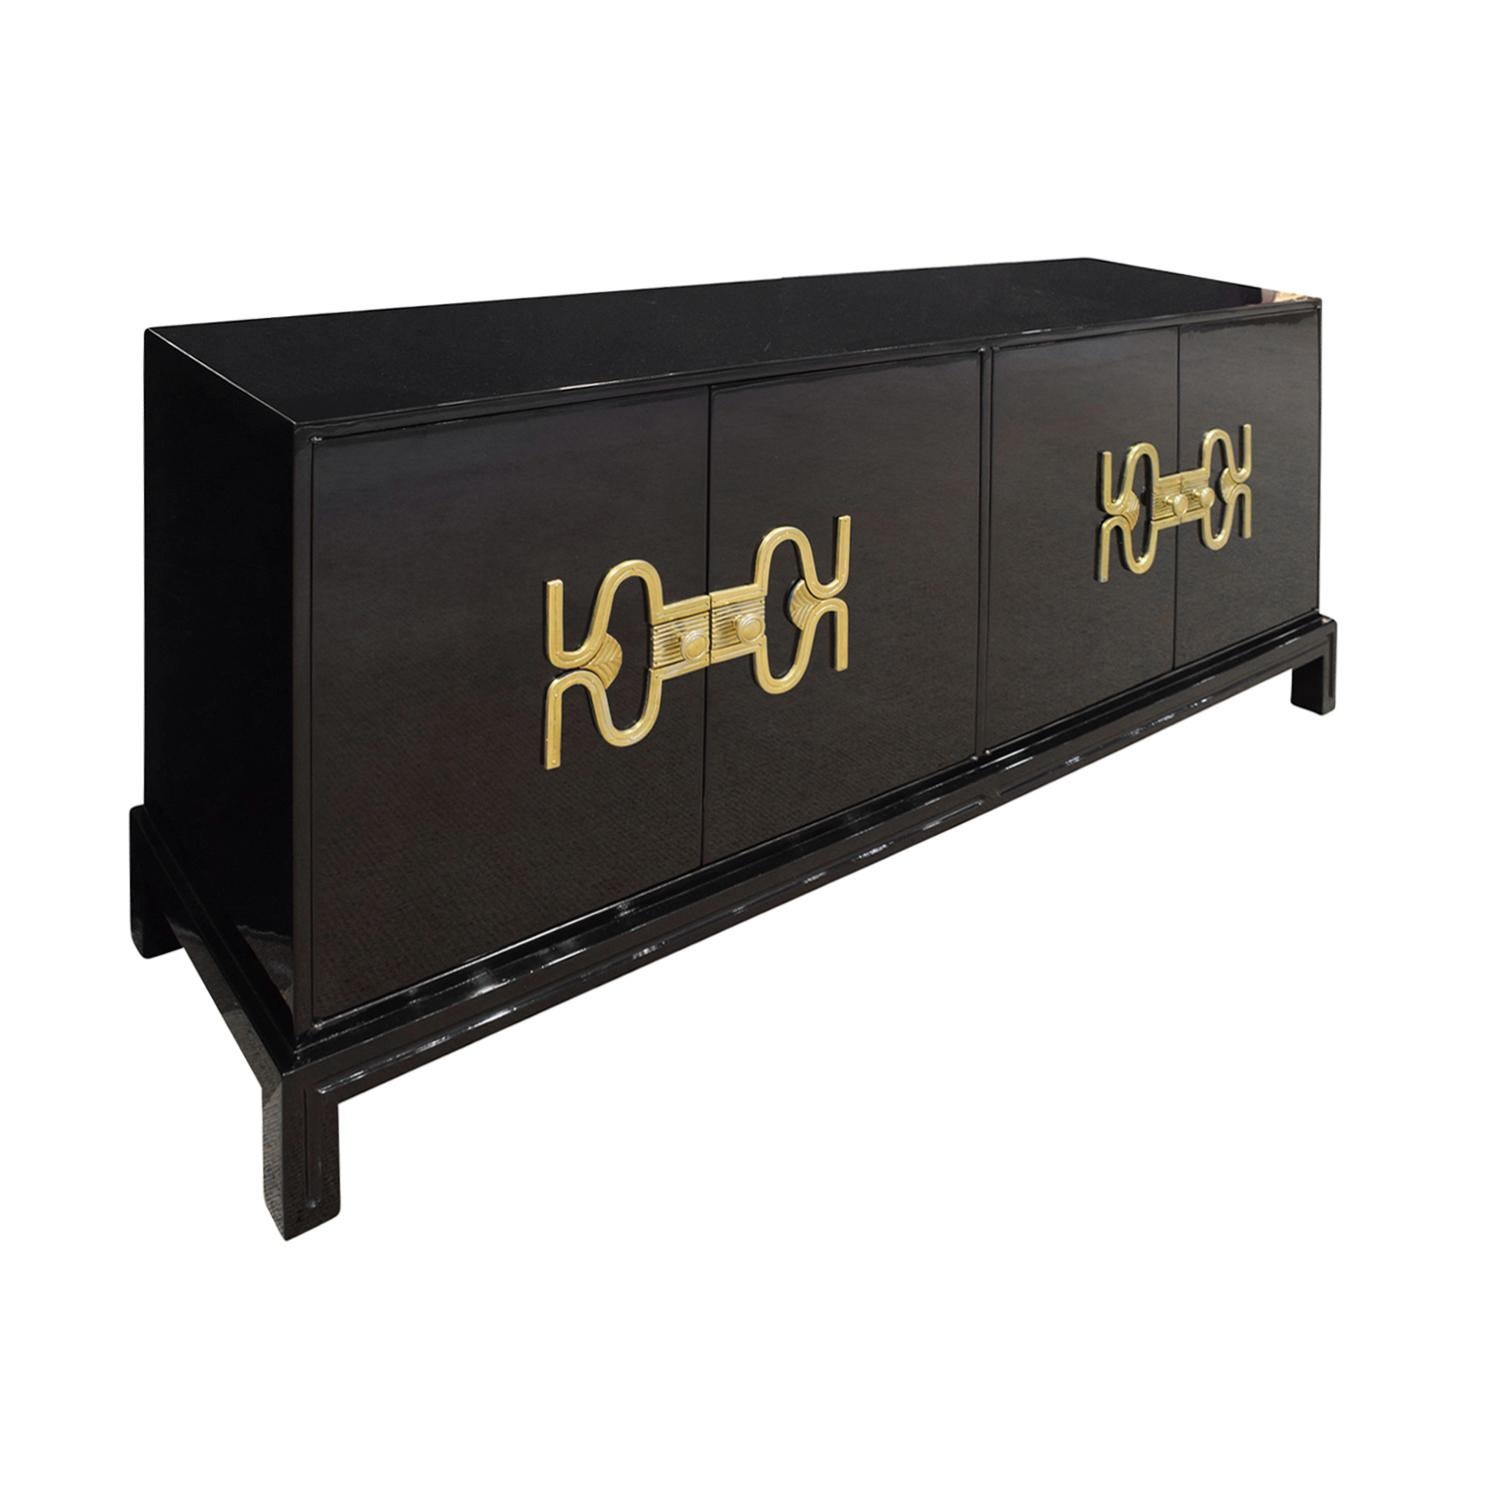 Rare and important 4 door credenza in high gloss black lacquer with exquisite brass hardware by Tommi Parzinger for Parzinger Originals, American, 1960s. This is an incredibly chic design and the hardware design is extraordinary. Newly lacquered.